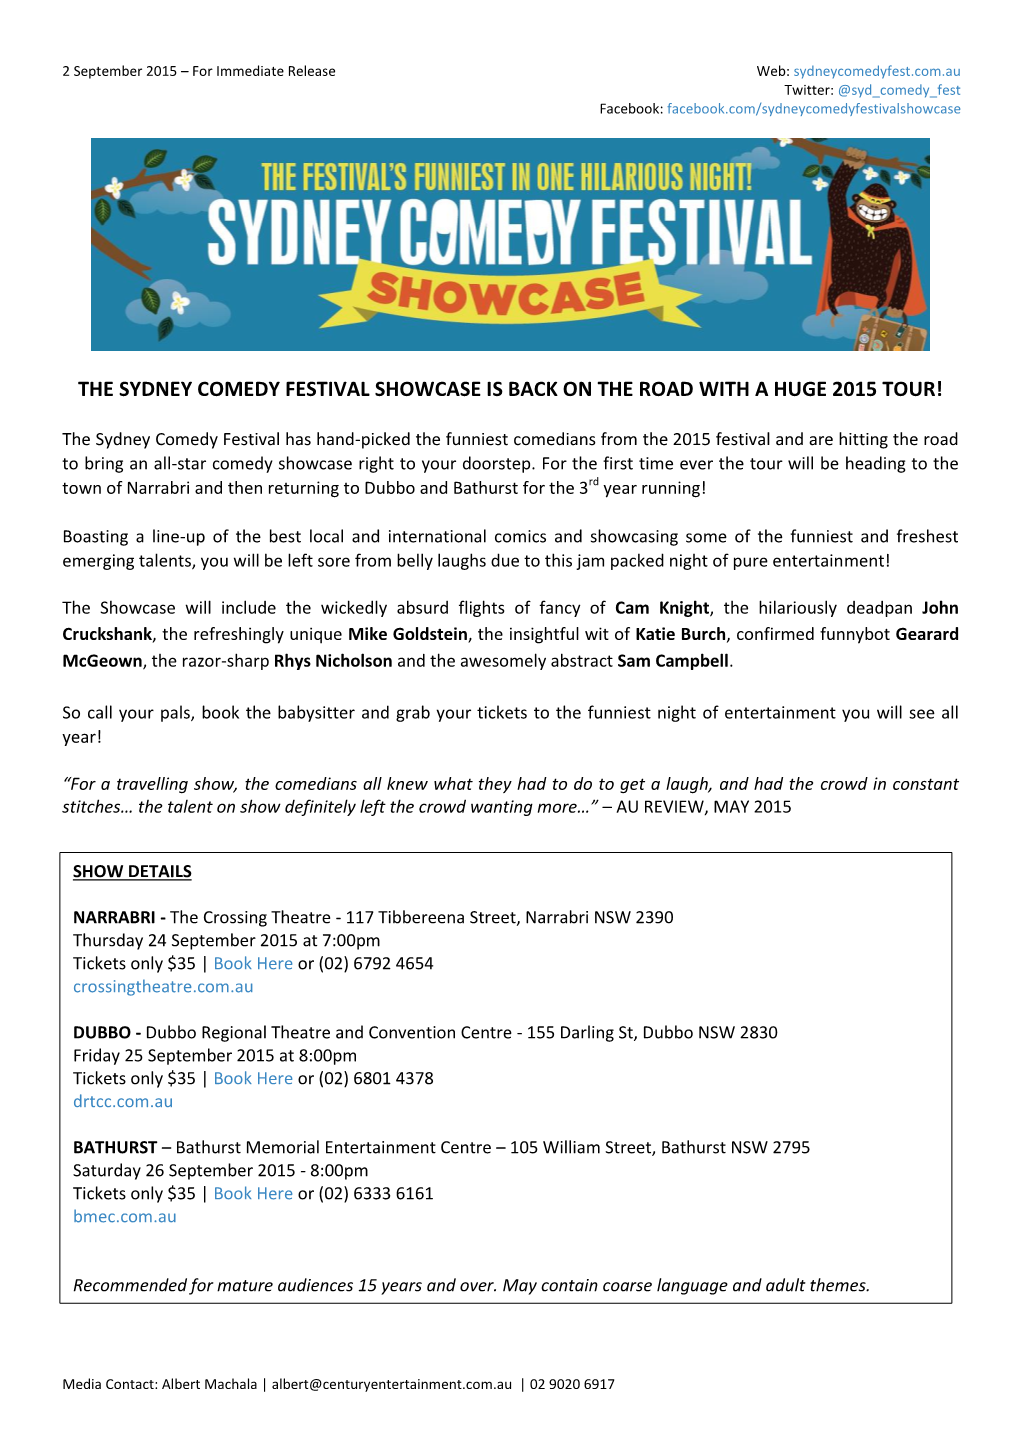 The Sydney Comedy Festival Showcase Is Back on the Road with a Huge 2015 Tour!